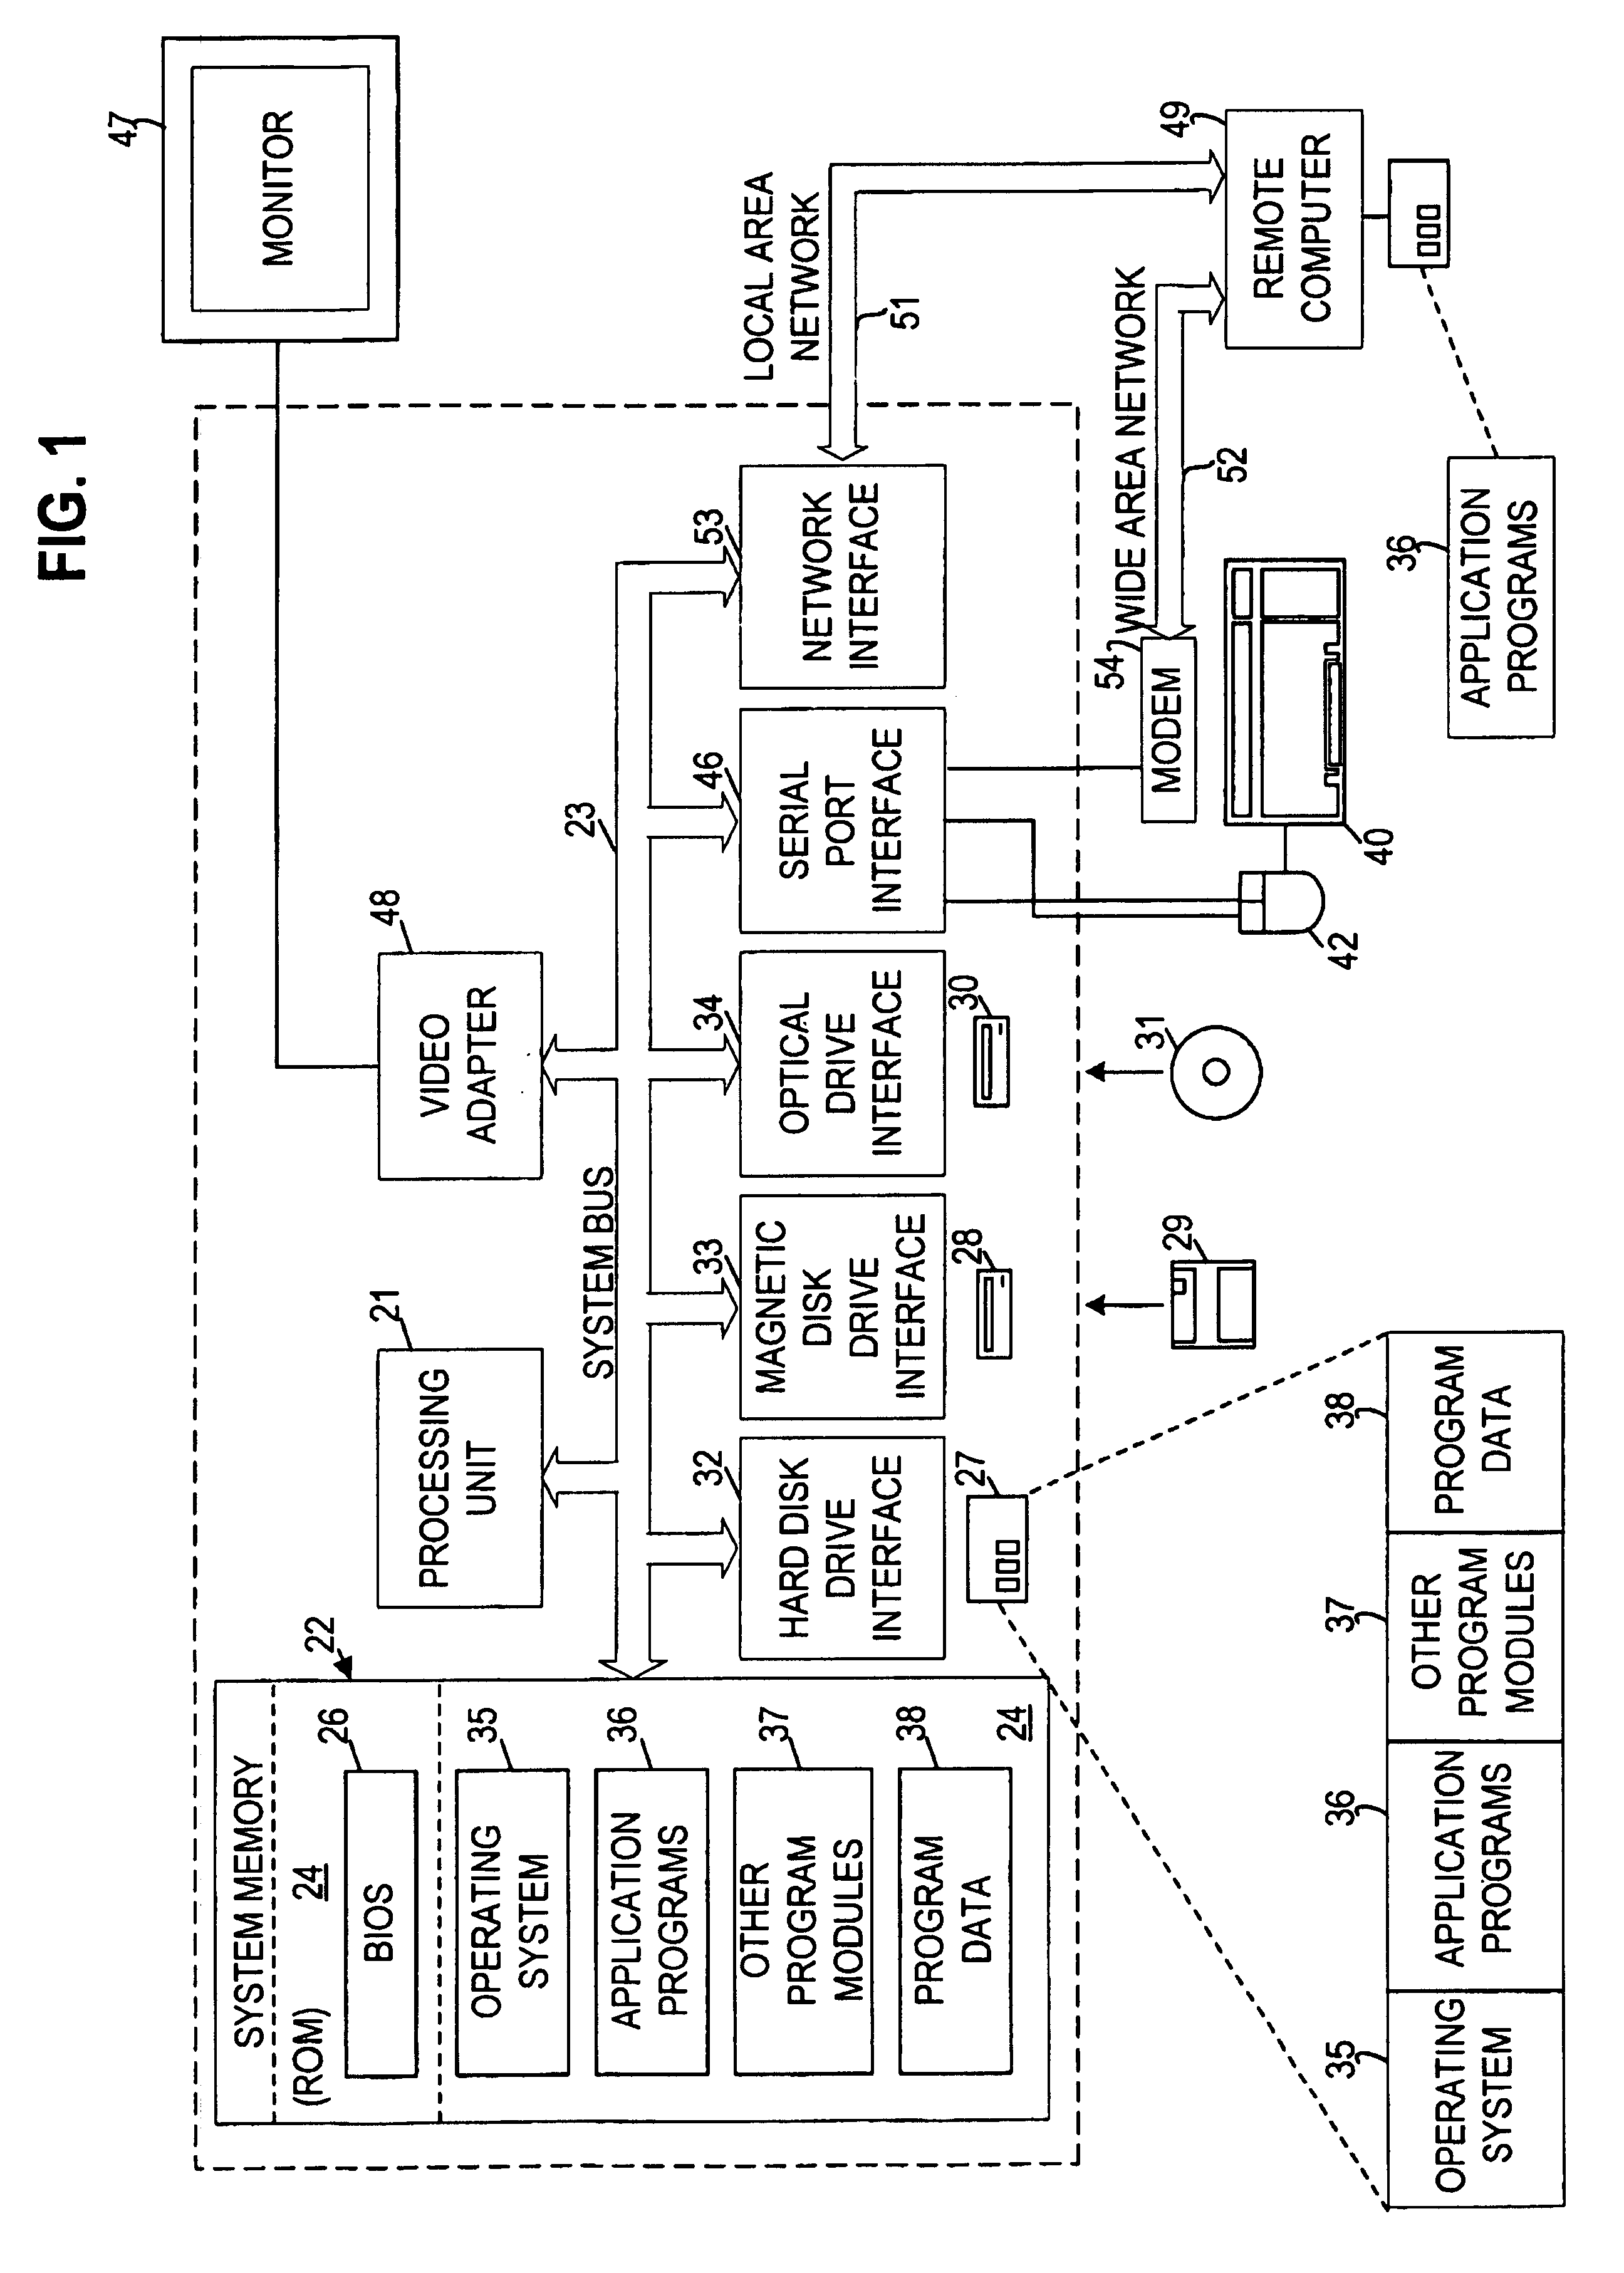 Method for automatically assigning priorities to documents and messages